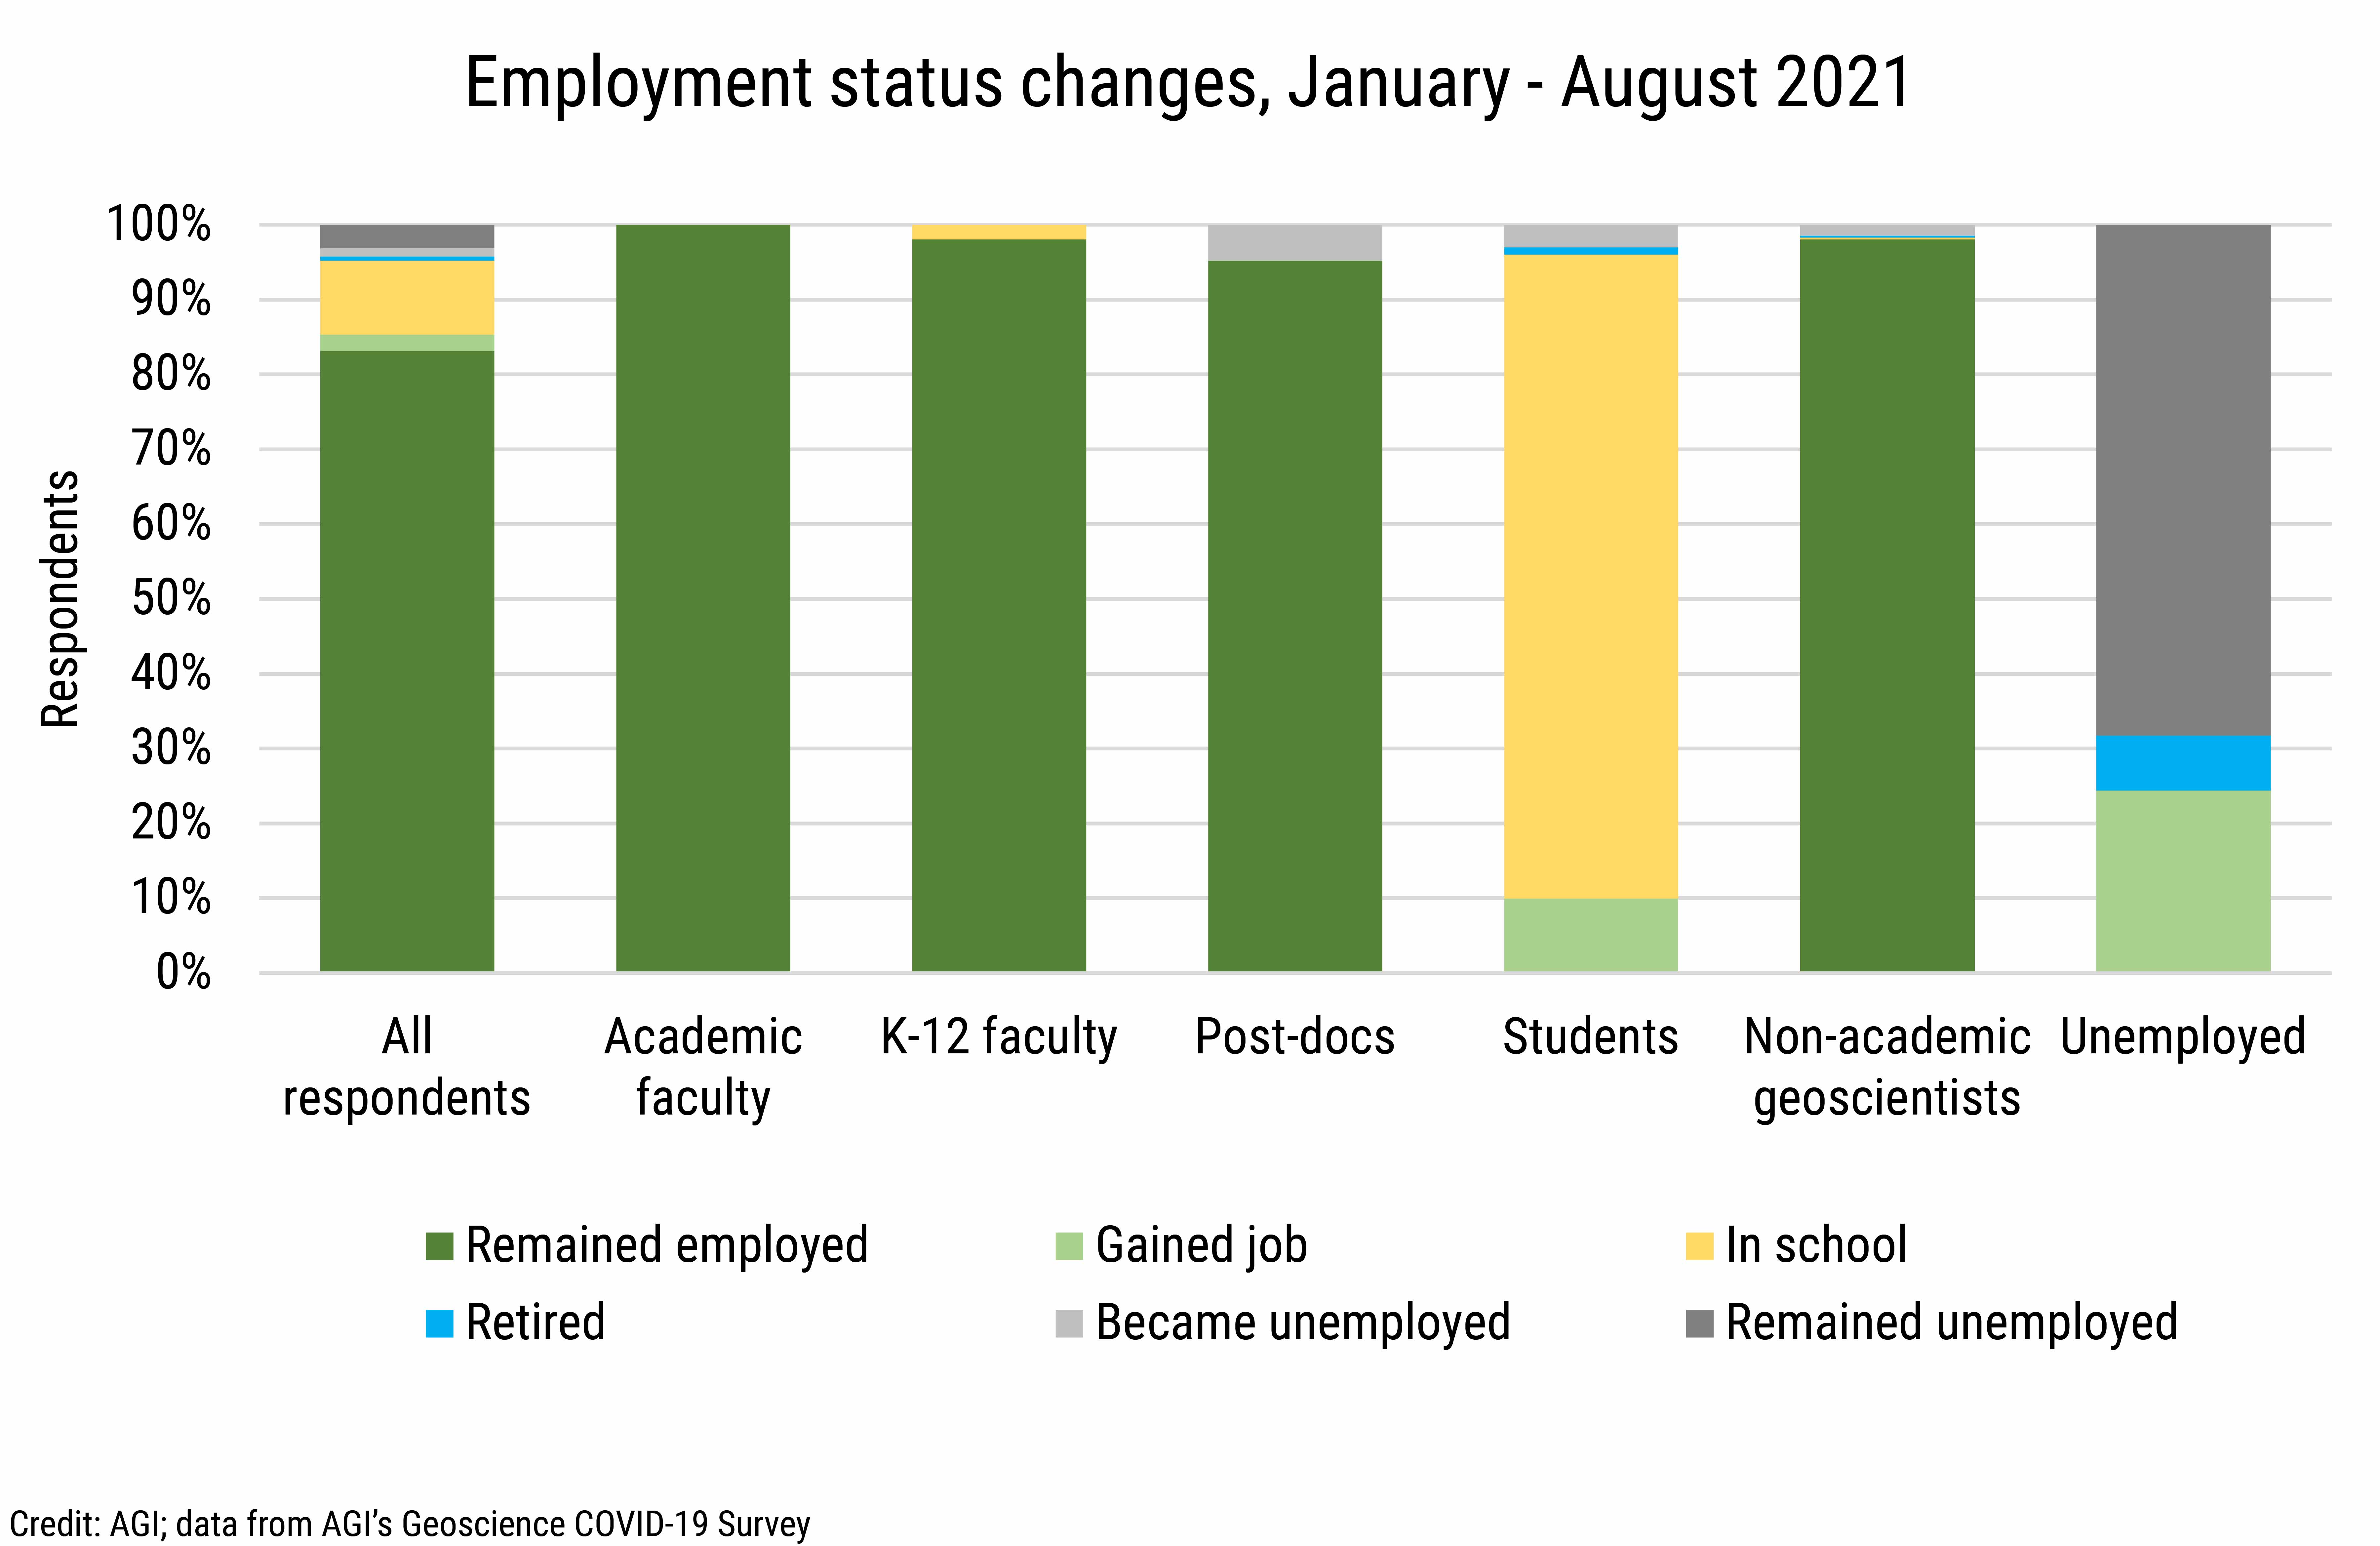 DB_2021-024 chart 01: Employment status changes, January - August 2021 (Credit: AGI; data from AGI's Geoscience COVID-19 Survey)